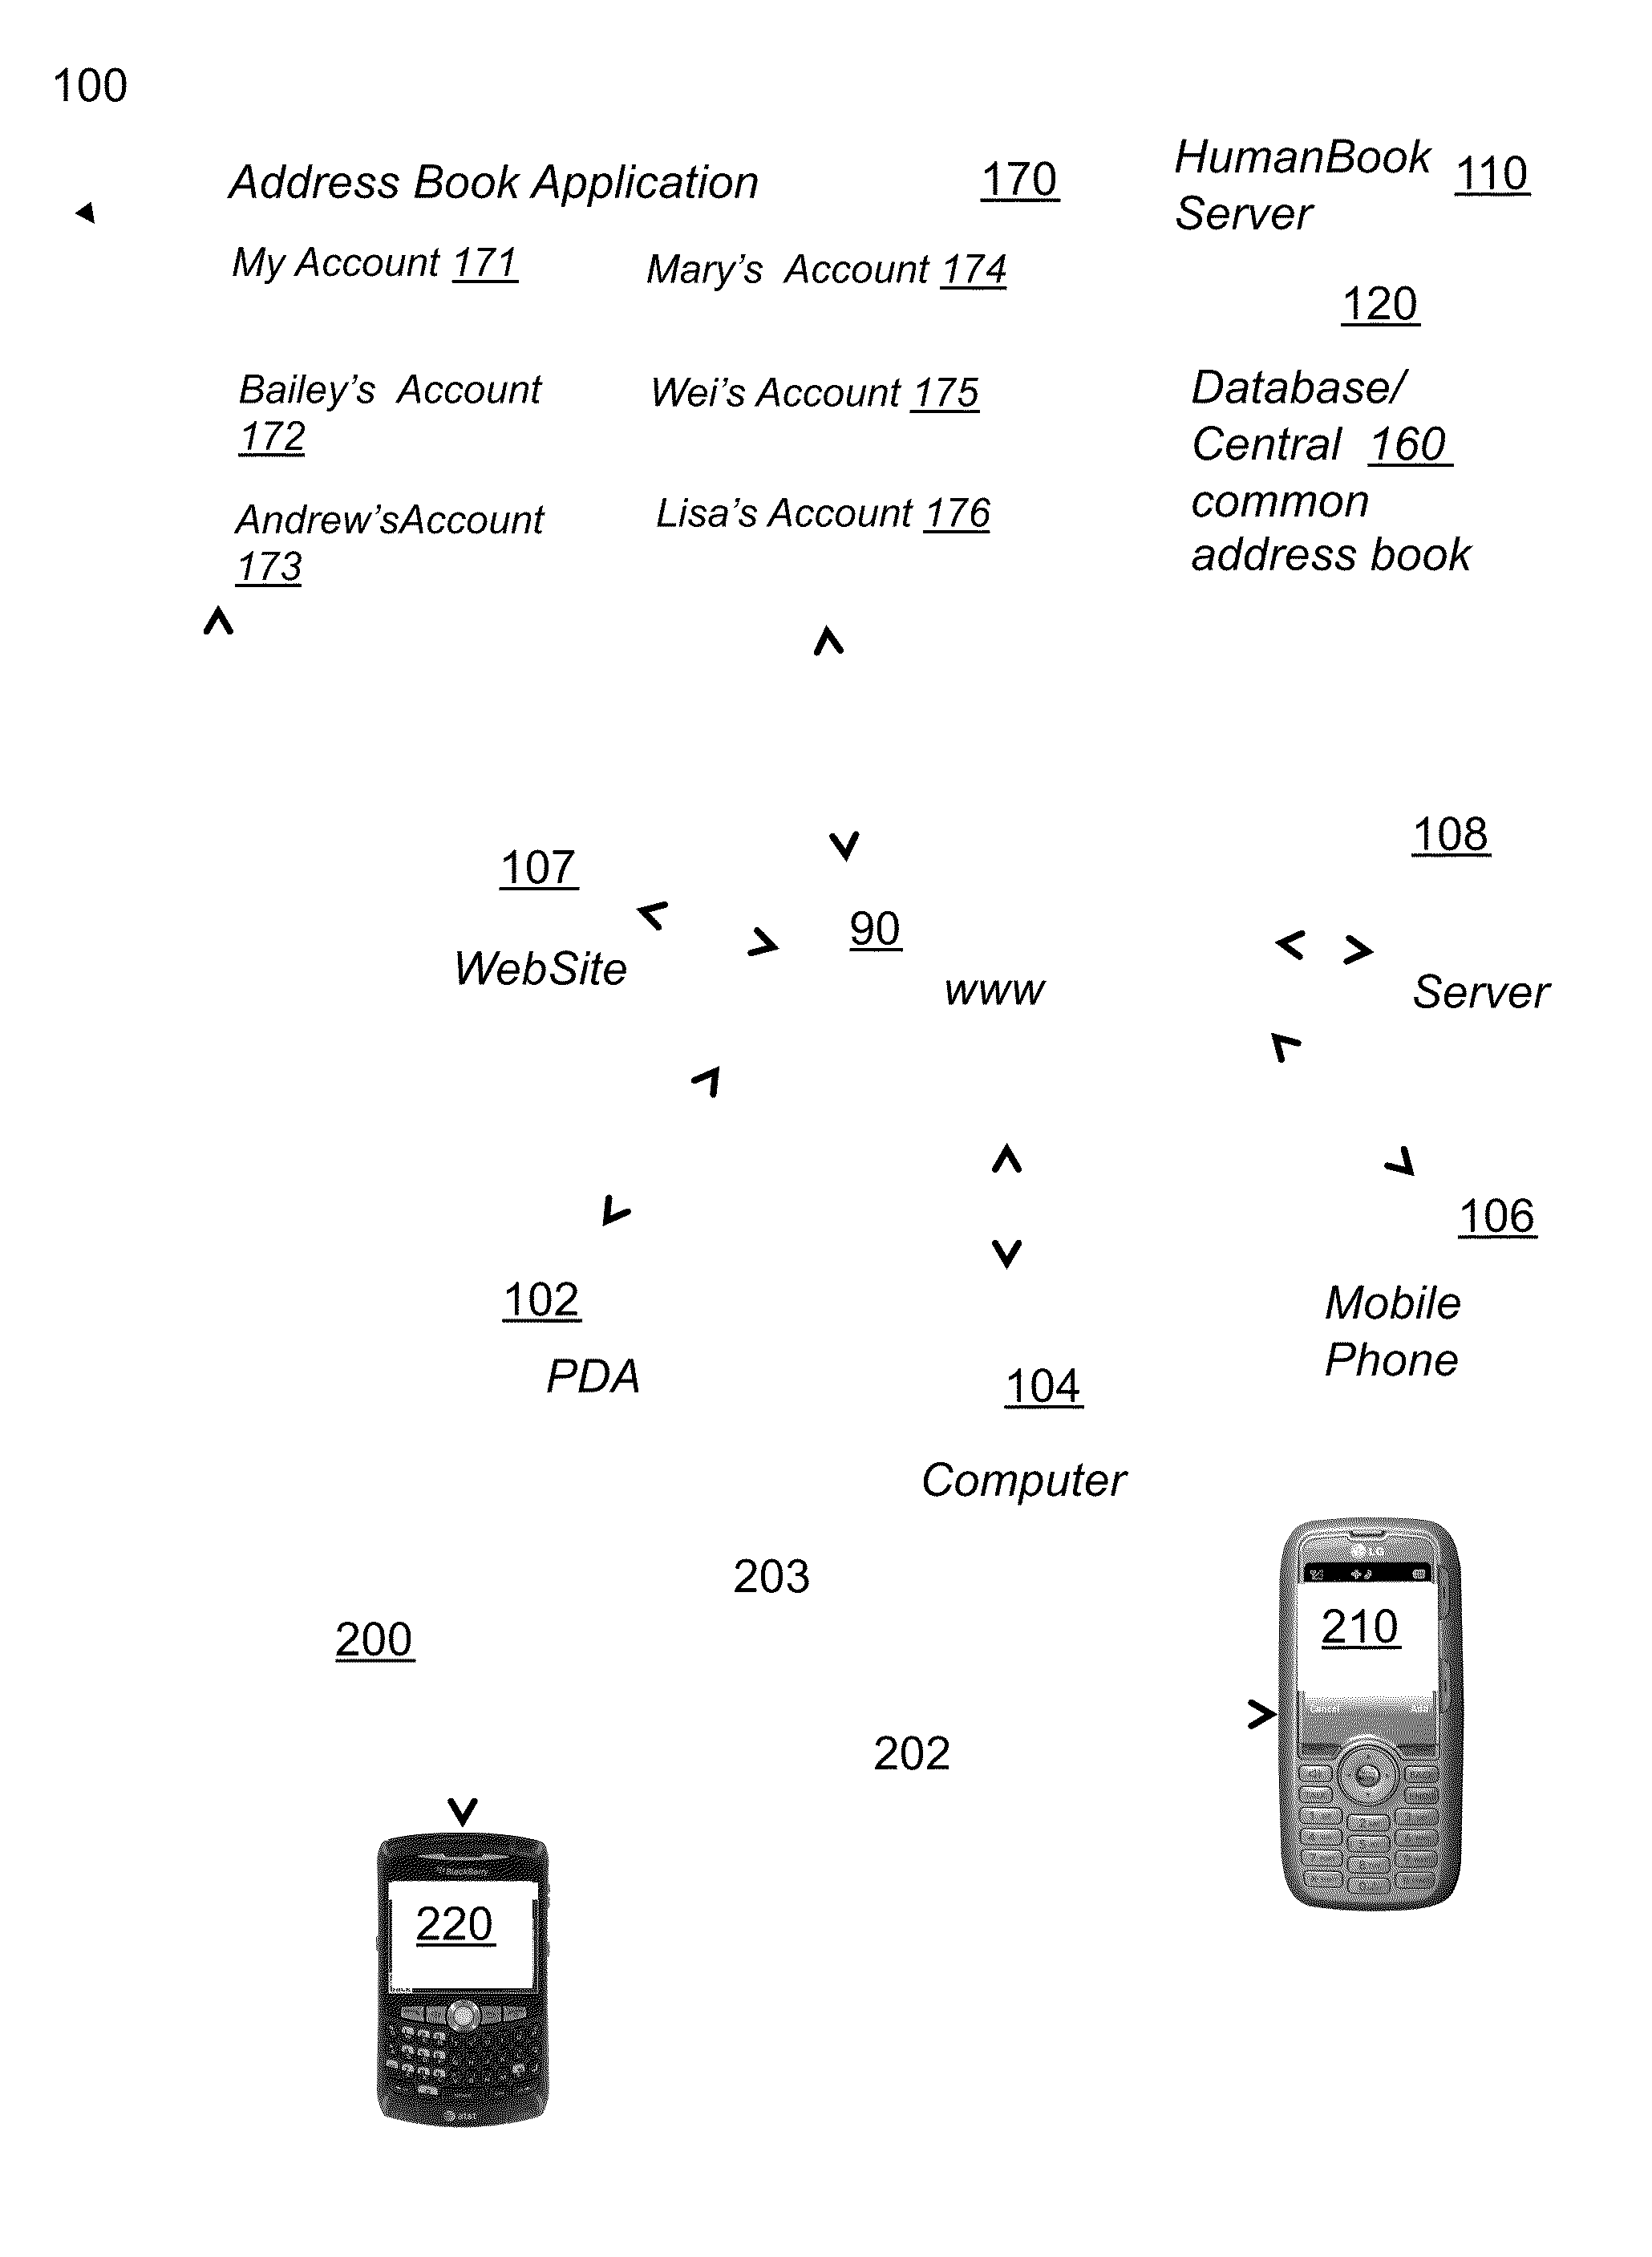 System and method for a remotely accessible web-based personal address book